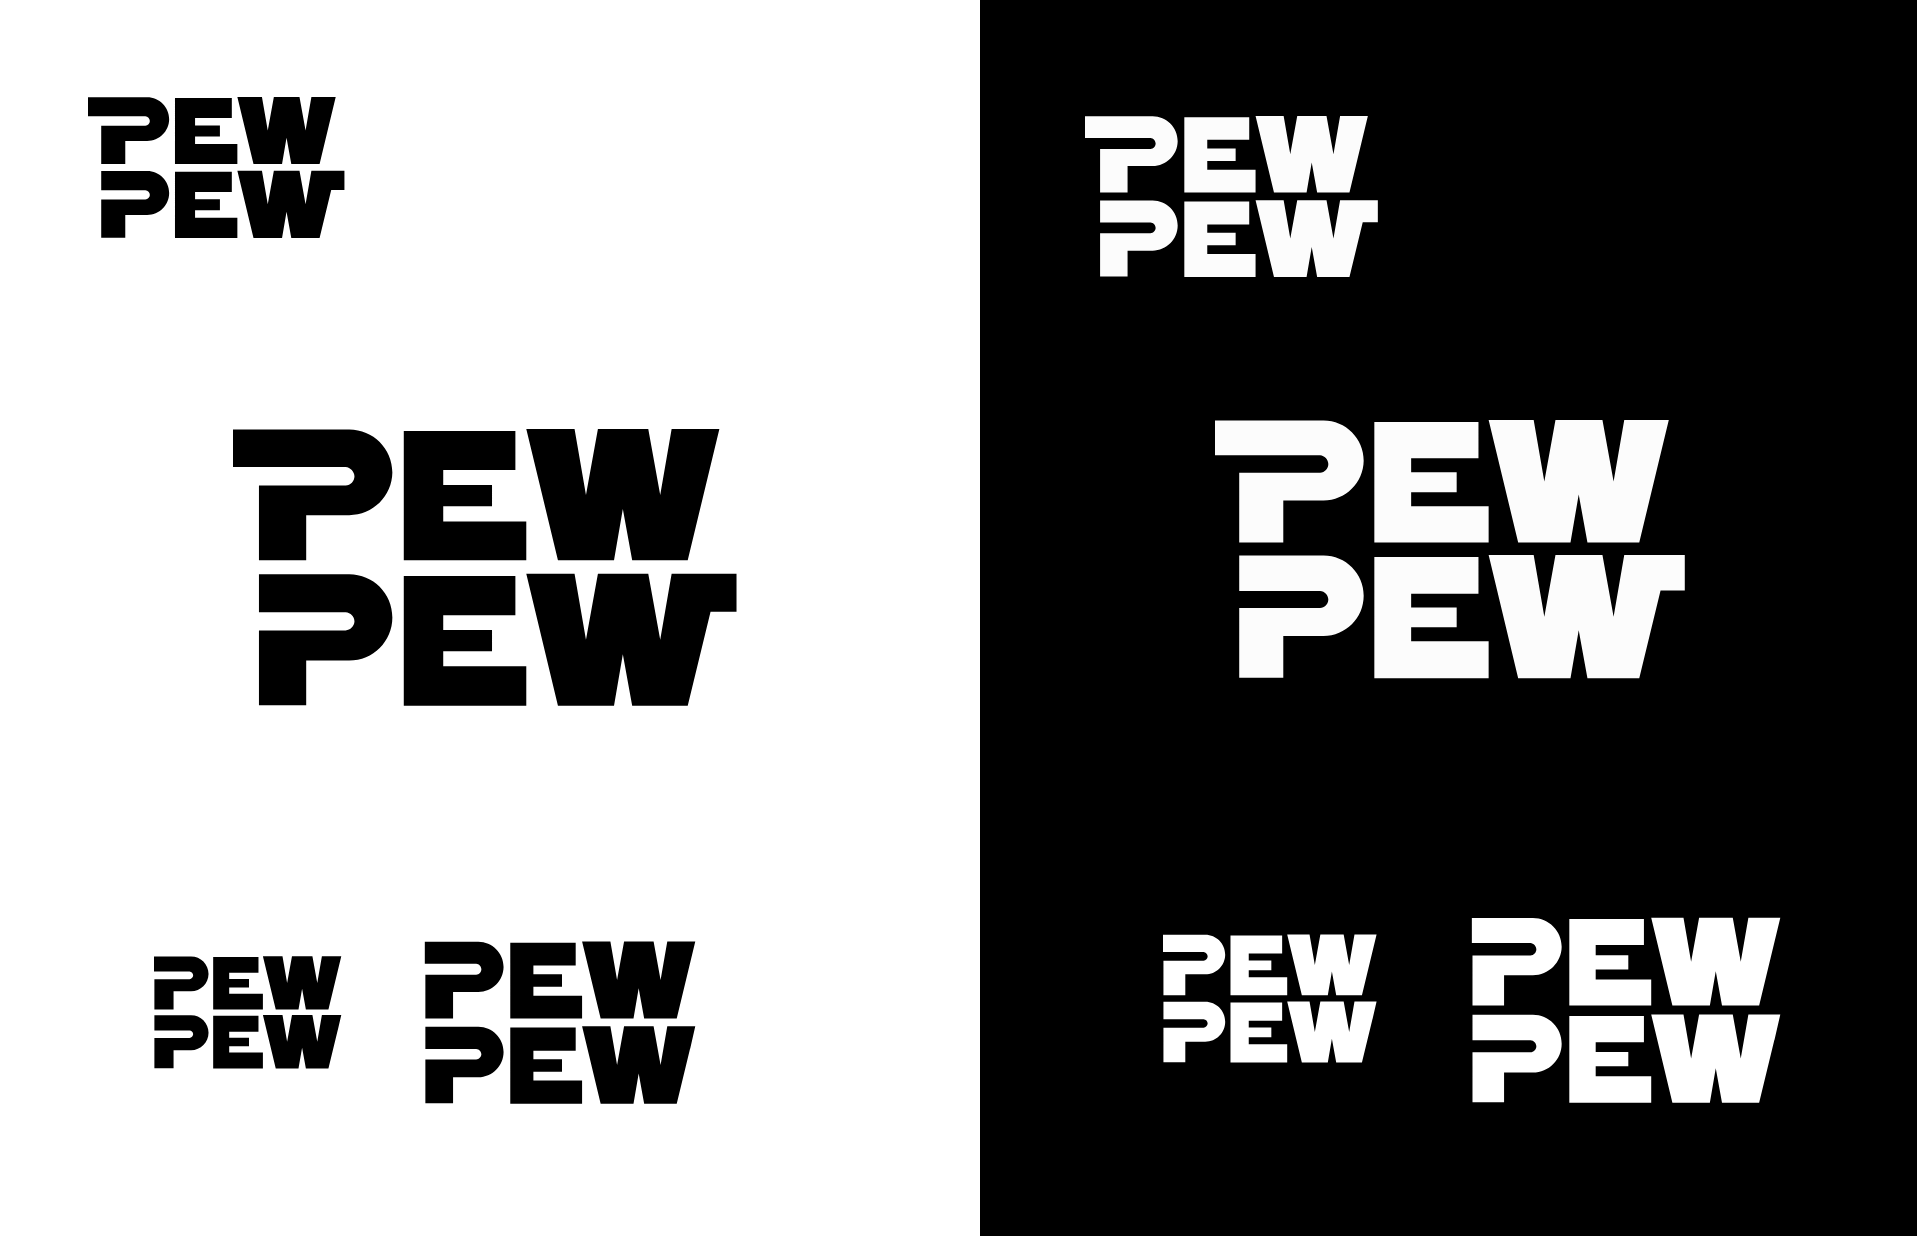 This is an image of the PewPew logo design.
